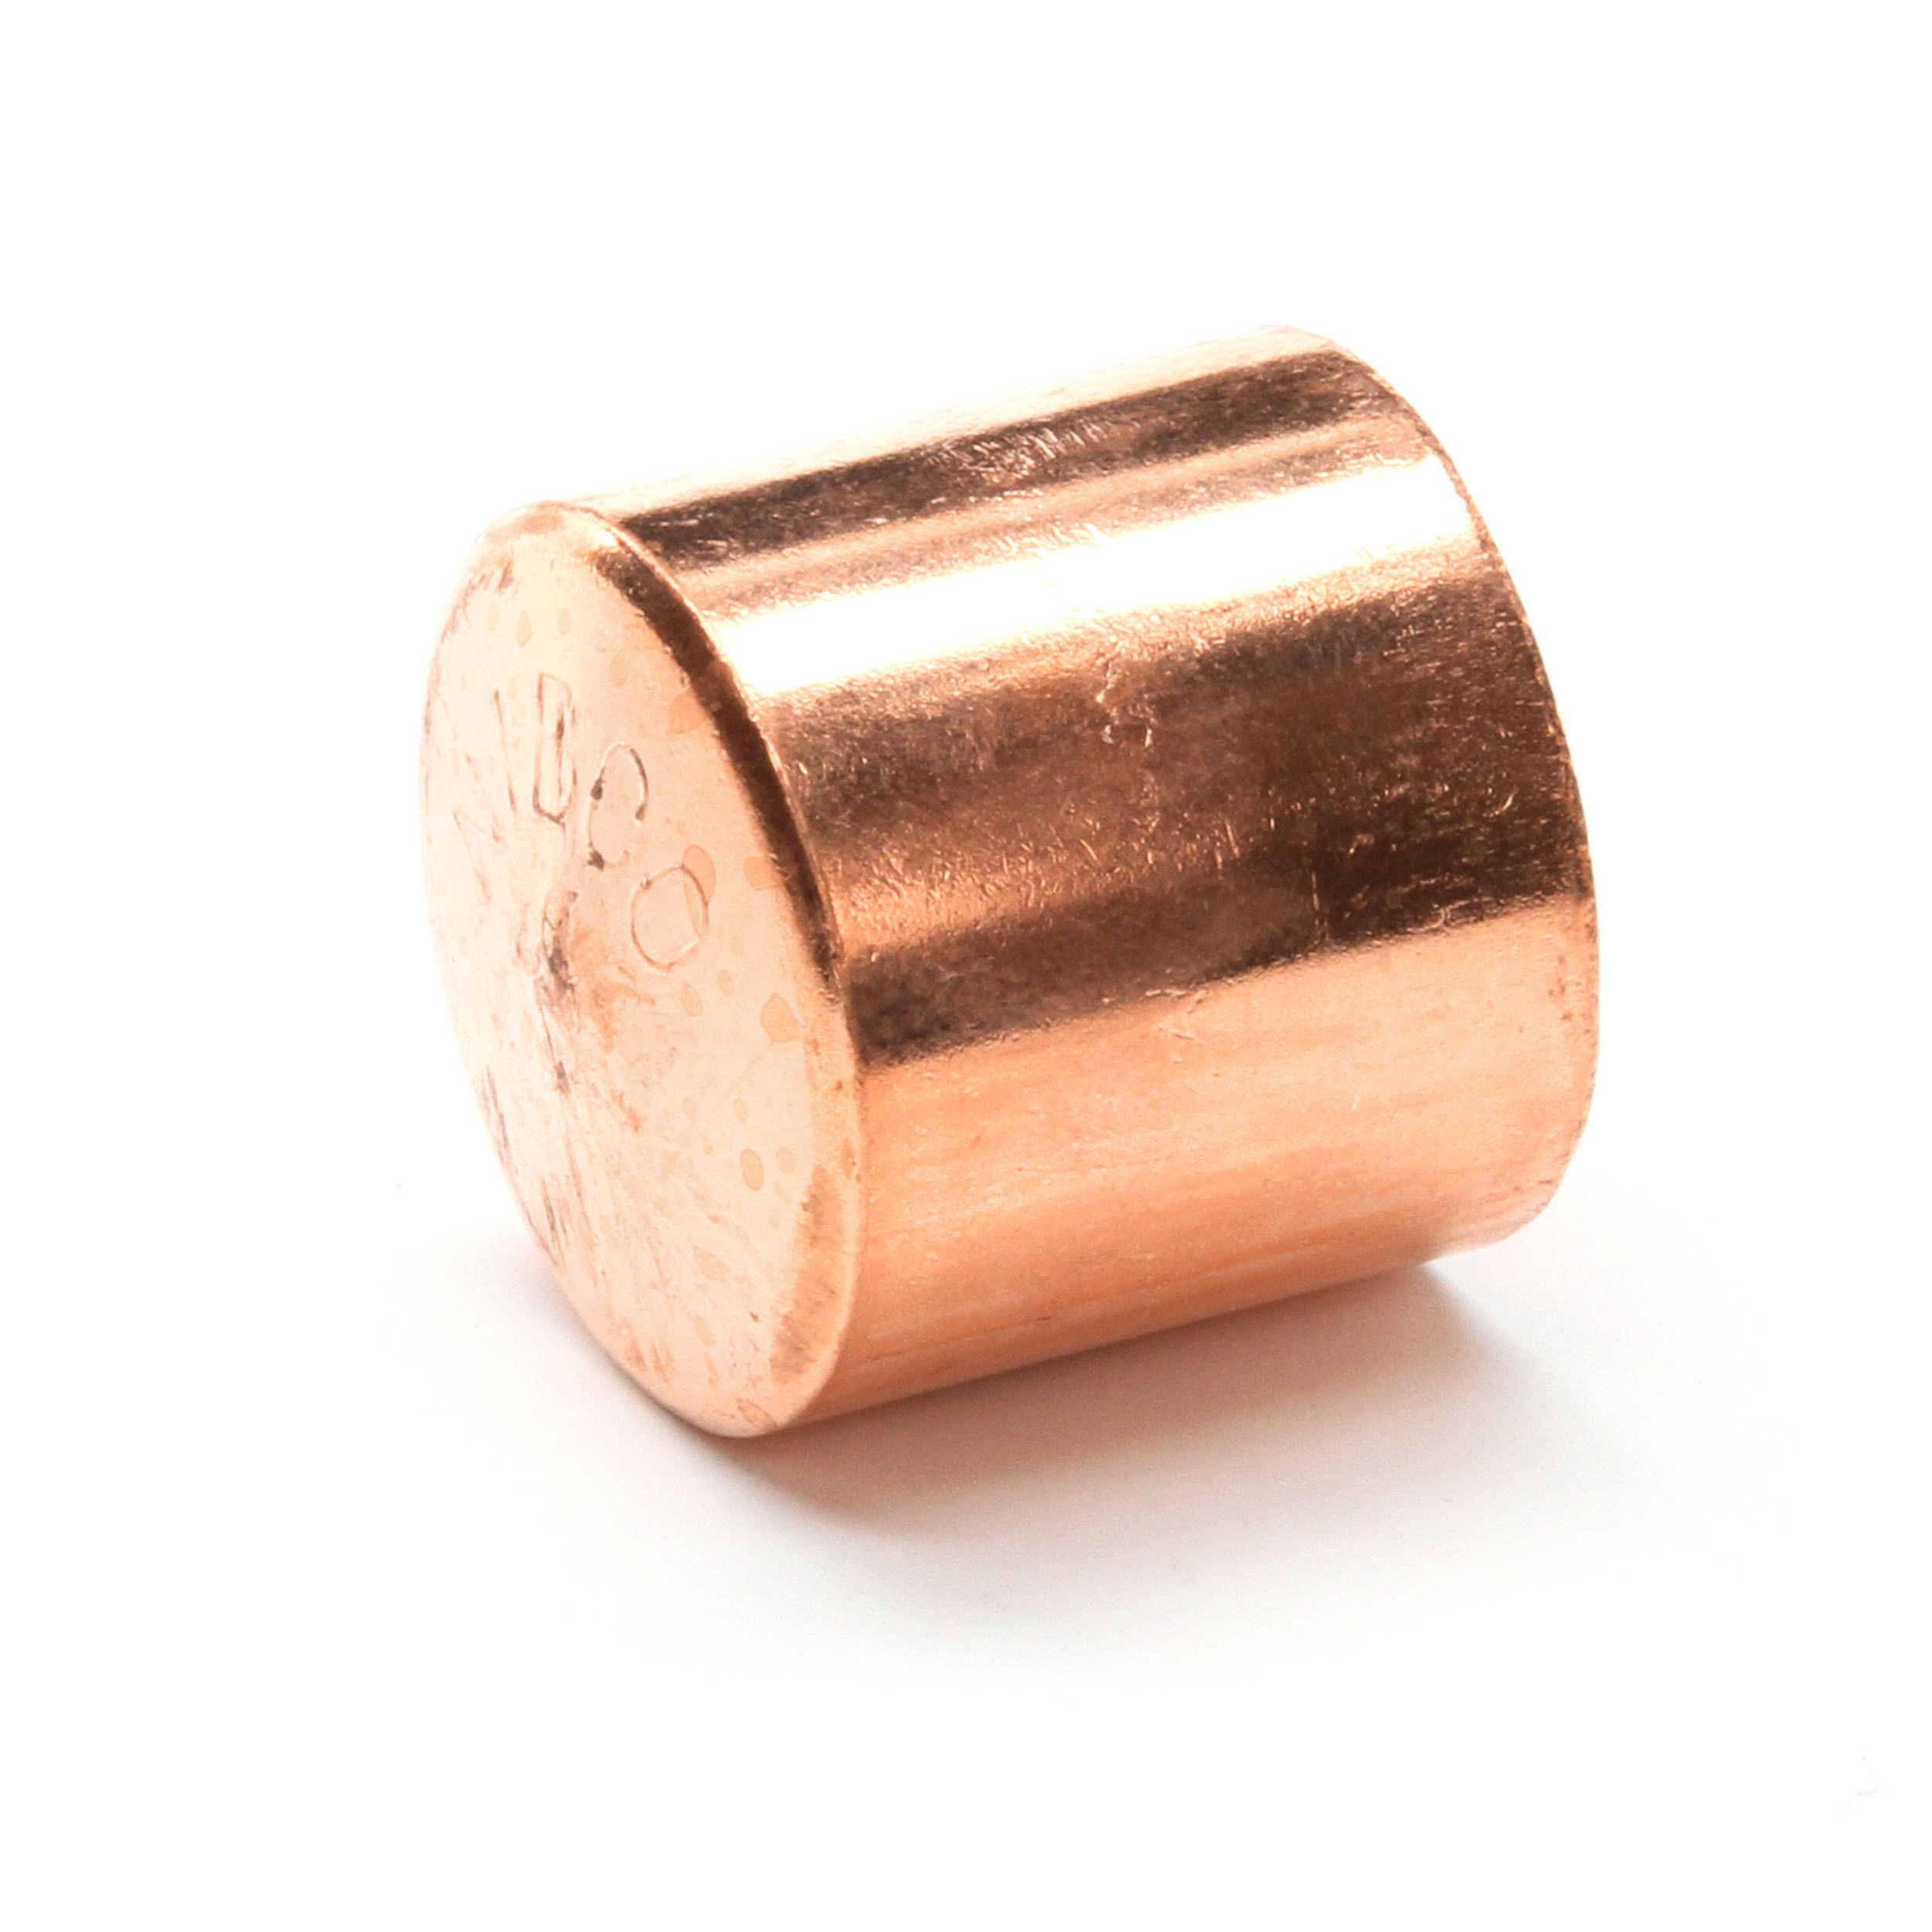 NEW SOLDER RING copper plumbing pipe 15mm x 8mm reducing coupler F X F 